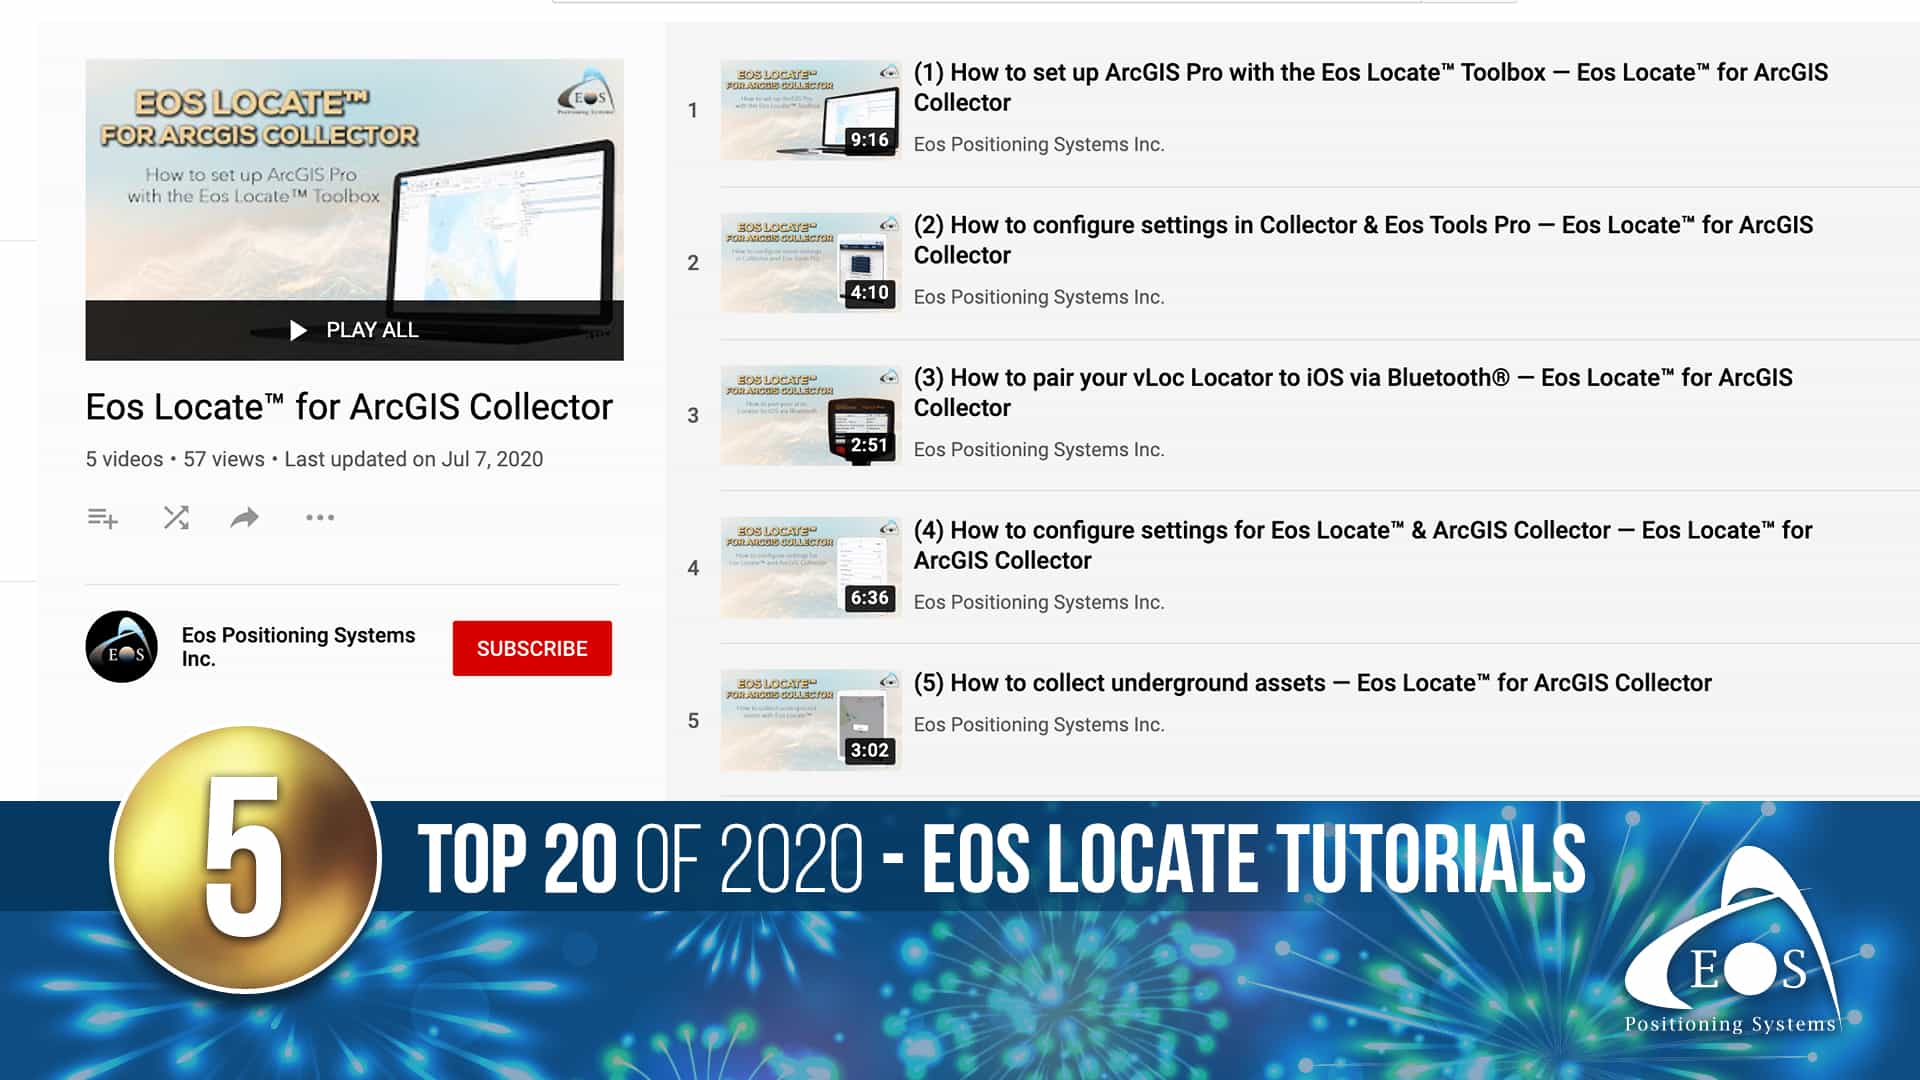 Eos Positioning Systems blog top articles of 2020: 5 - Eos Locate Tutorials